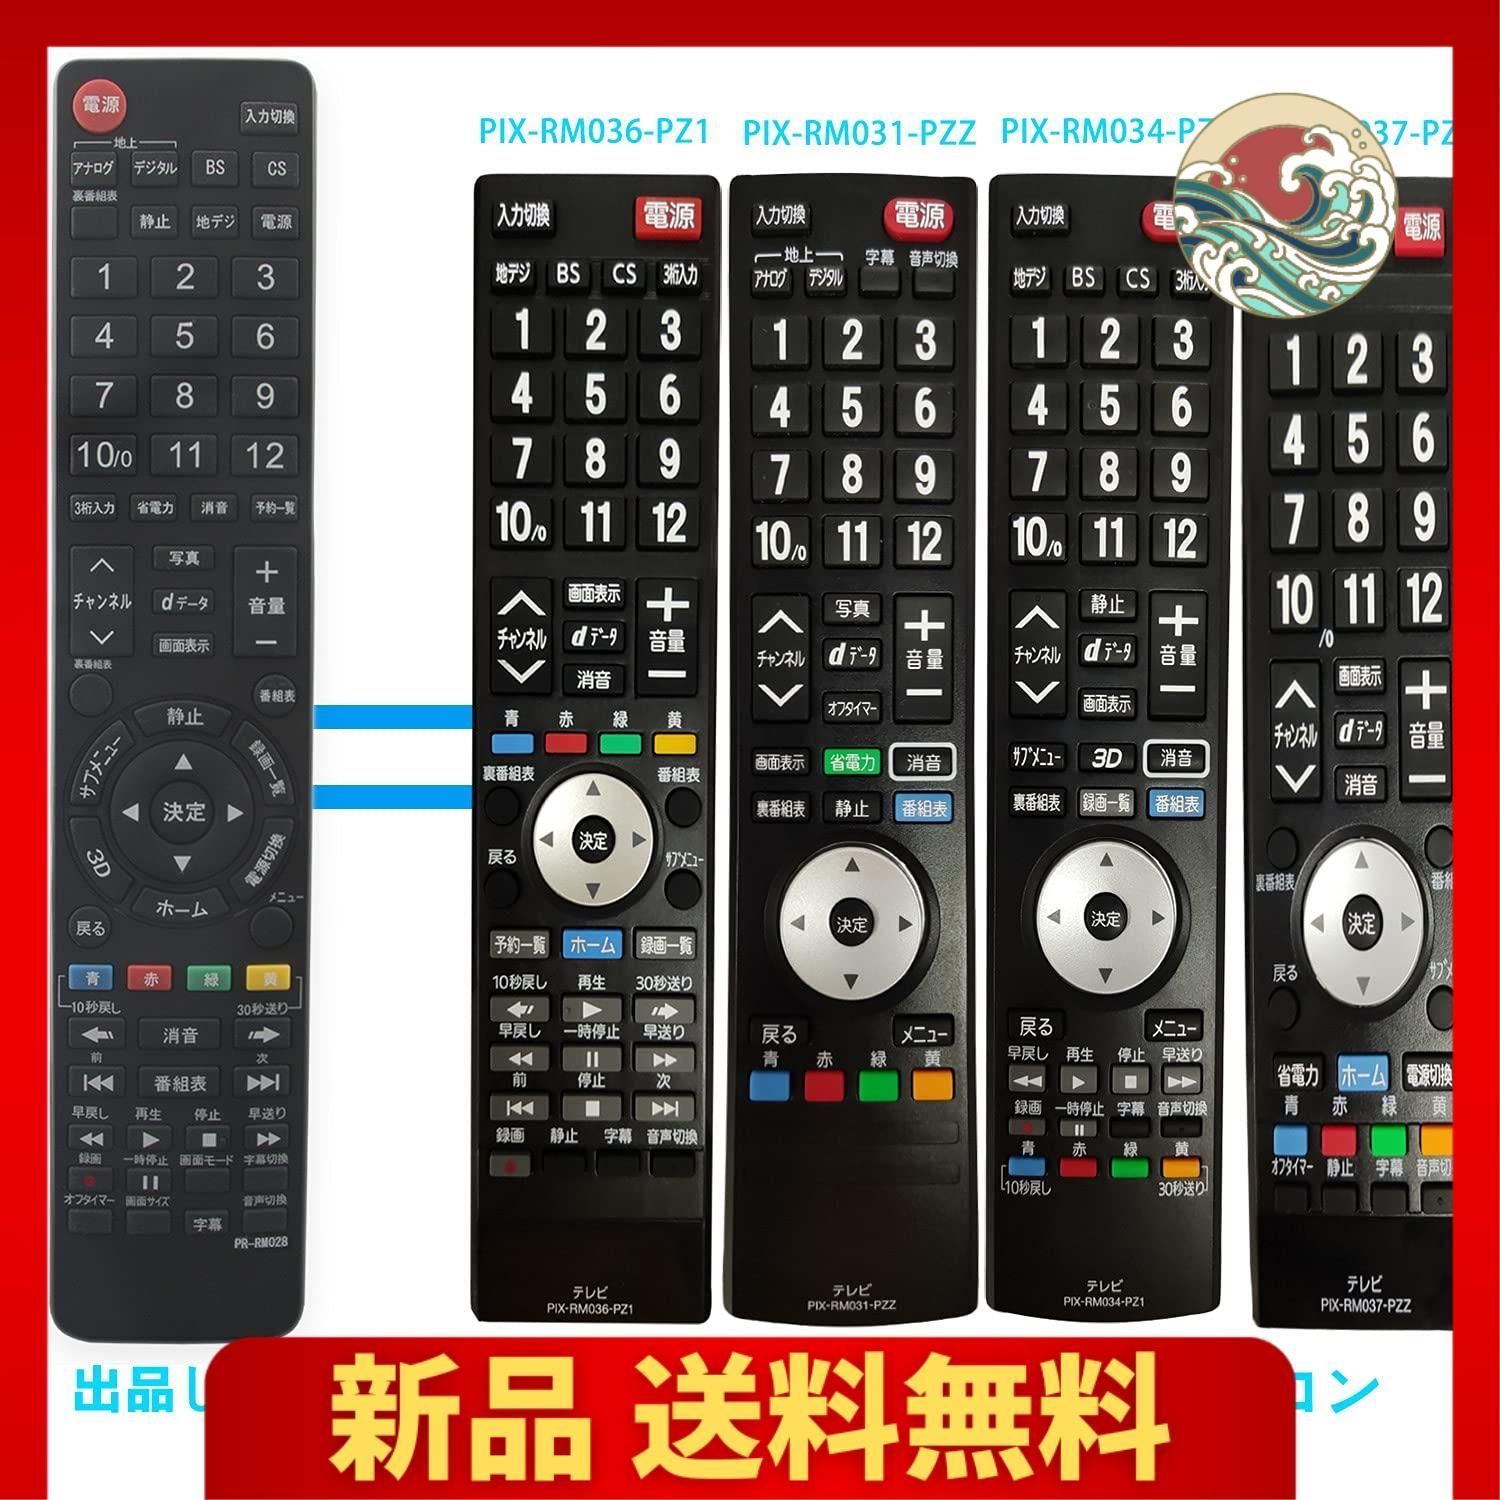 AULCMEET液晶テレビ用リモコン fit for PRODIA ピクセラPIX-RM024-PA1 PIX-RM028-PA1 PIX-RM033- PZ1 PIX-RM036-PZ1 PIX-RM031-PZZ PIX-RM034-PZ1 PIX-RM03 - メルカリ